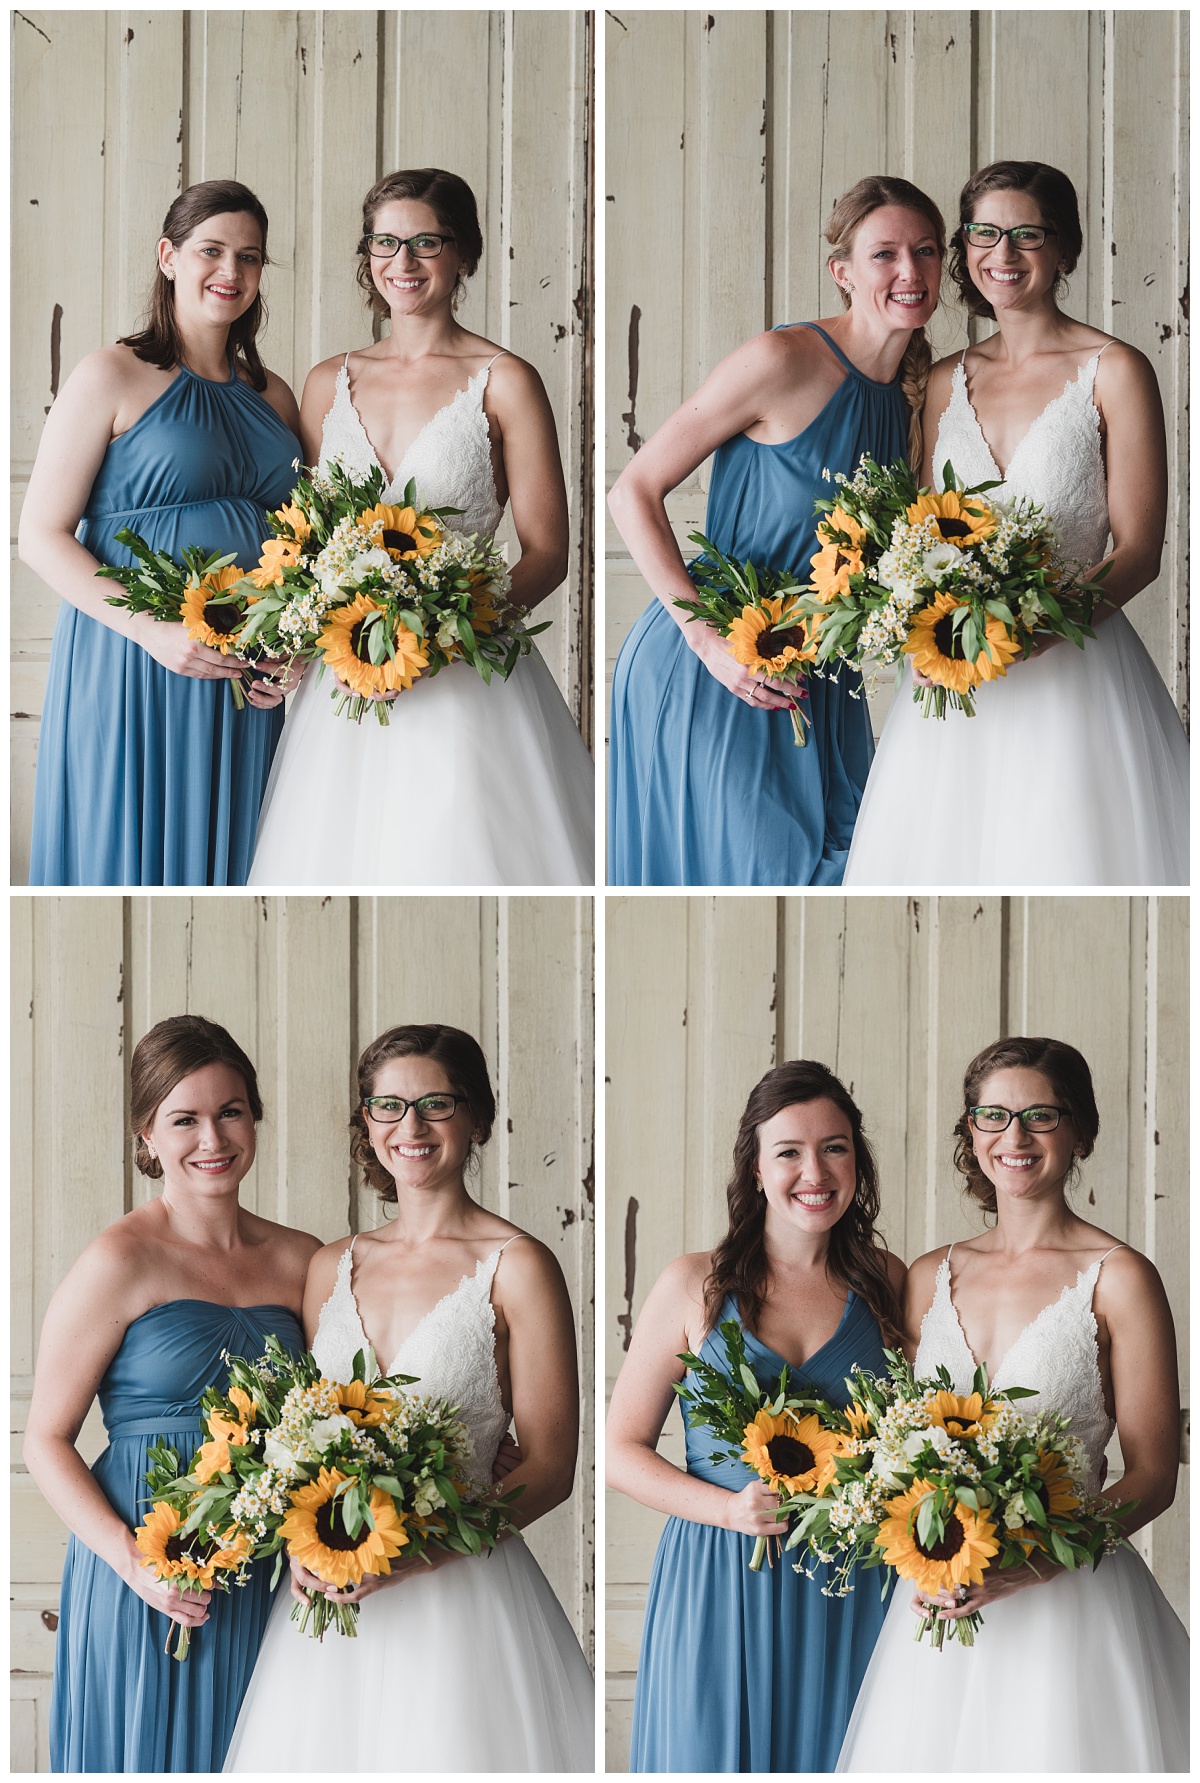 A series of 4 images of the bride with each bridesmaid. Bride is wearing a tulle-skirted gown with deep v neckline and leaf embroidered motif. Bridesmaids are wearing cornflower blue floor-length dresses. All carry sunflower boquets.